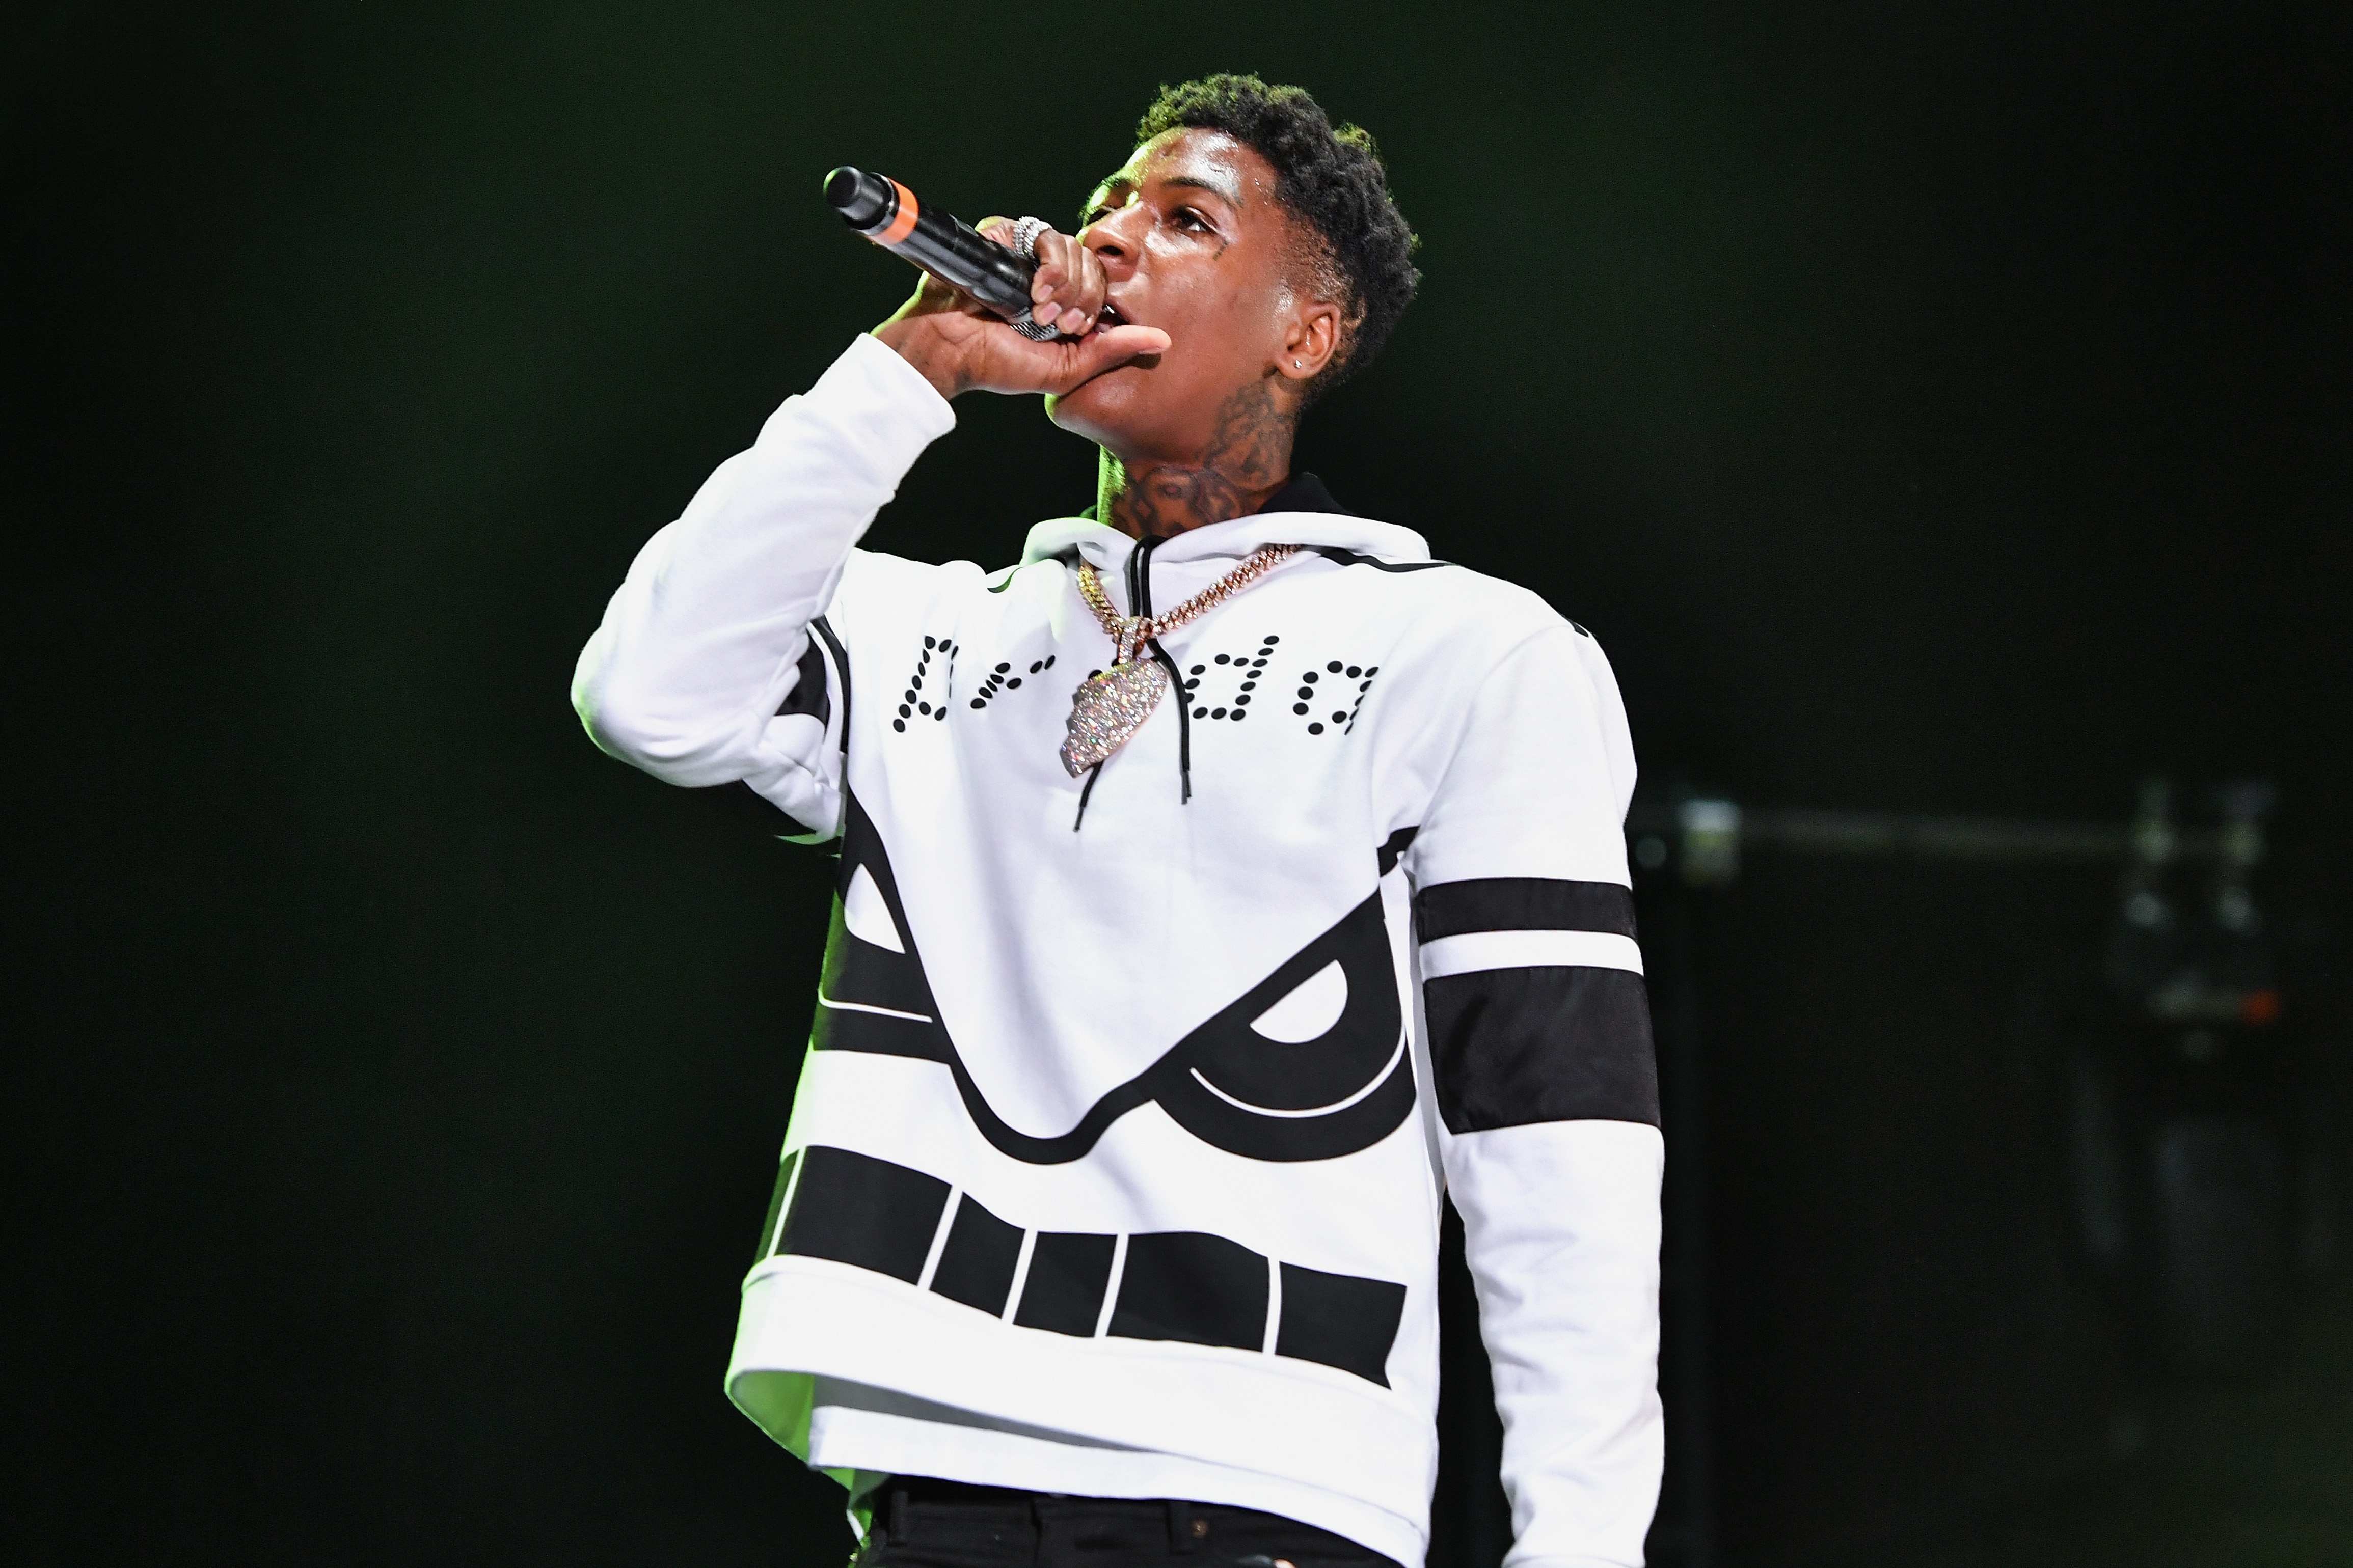 YoungBoy NeverBrokeAgain performs during Lil WeezyAna at Champions Square on August 25, 2018, in New Orleans, Louisiana. | Source: Getty Images